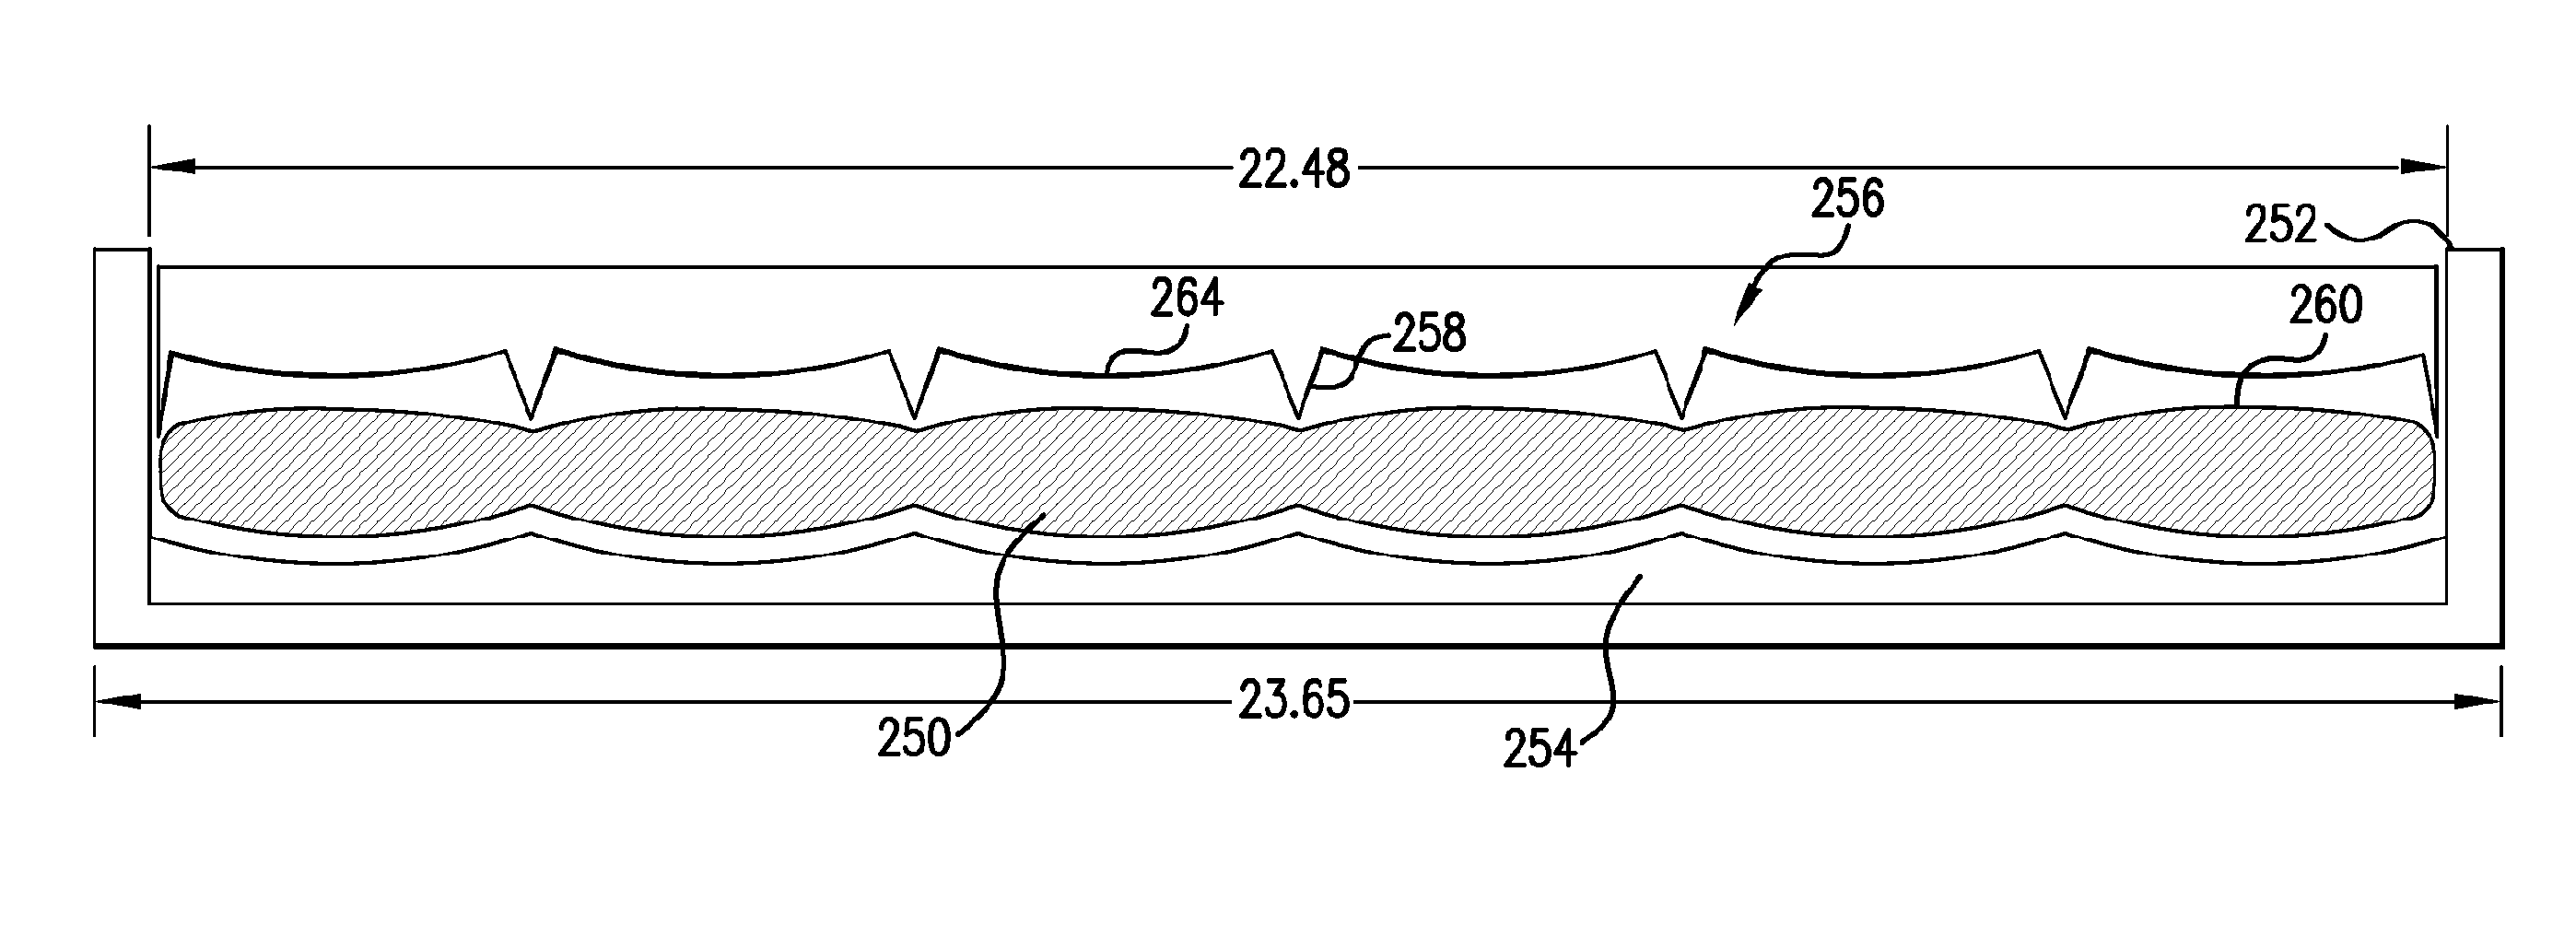 Manufacturing and Installation of Insulated Pipes or Elements Thereof